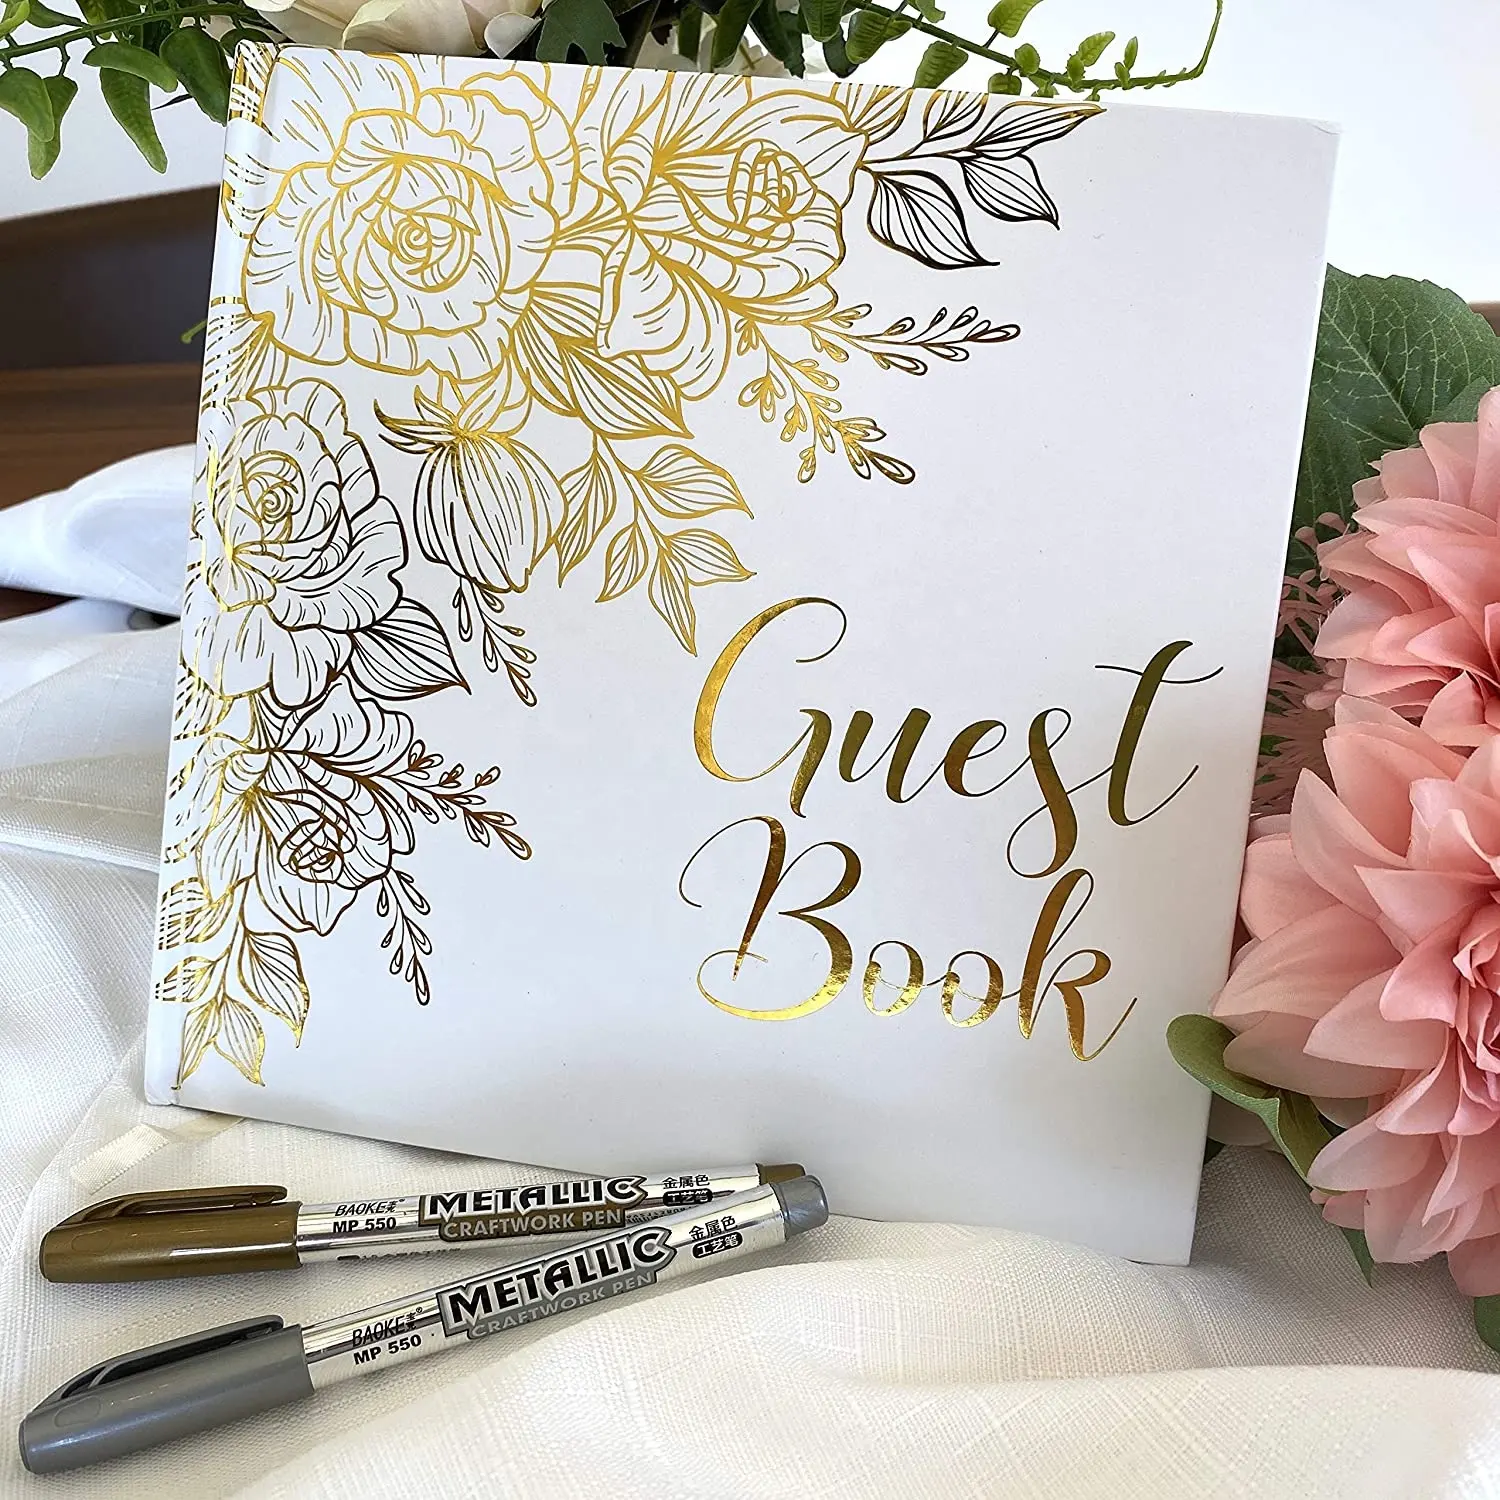 Hard Cover Gold Foil Gilded Edges Thick White Paper Photo Album Memory Sign in Wedding Guest Book with pen